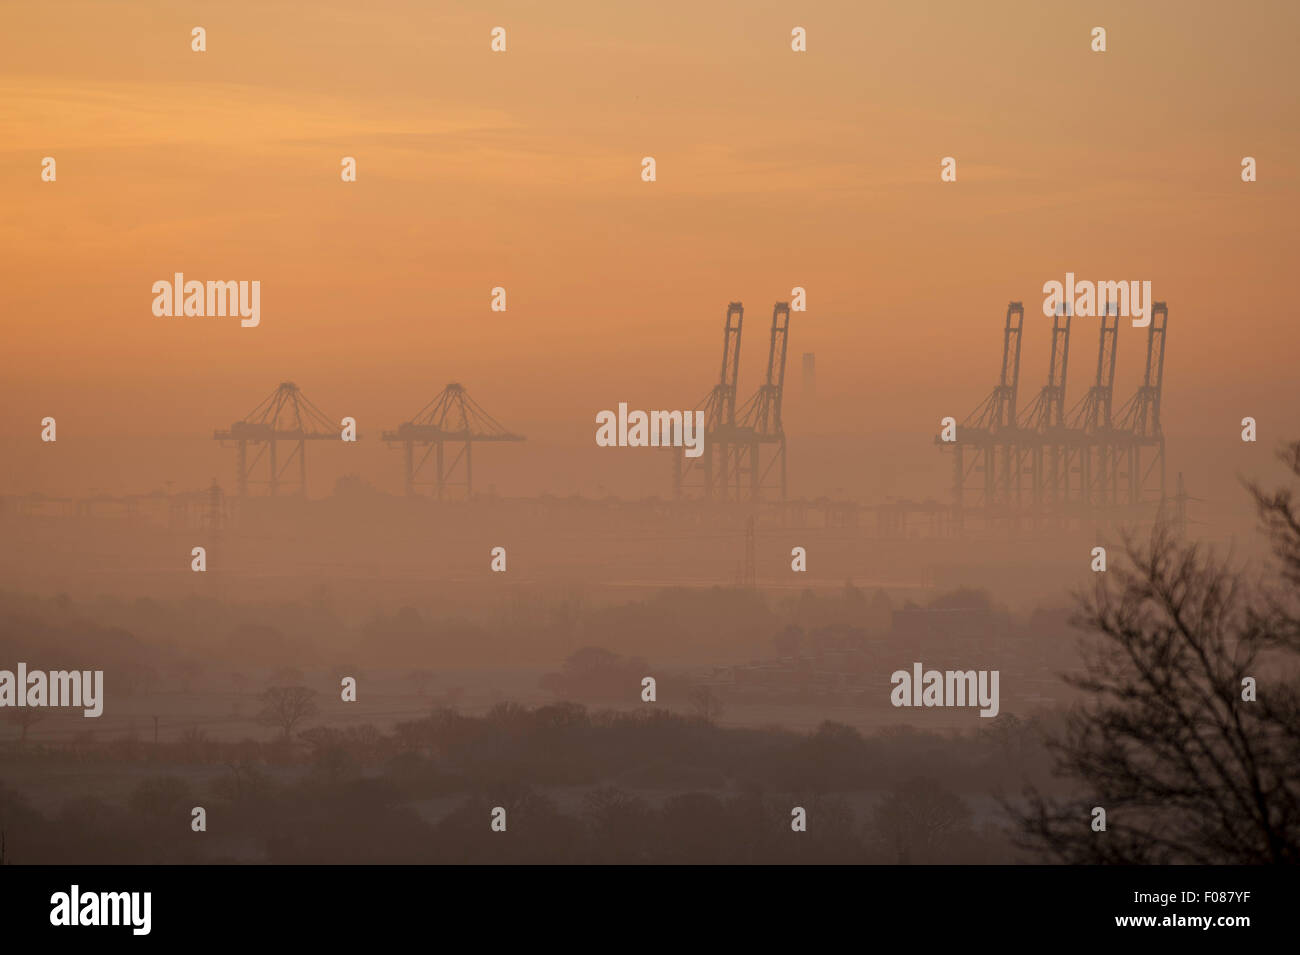 Massive cranes of DP World, London Gateway container port, rise from early morning winter mist. Coryton, Essex, UK. Stock Photo